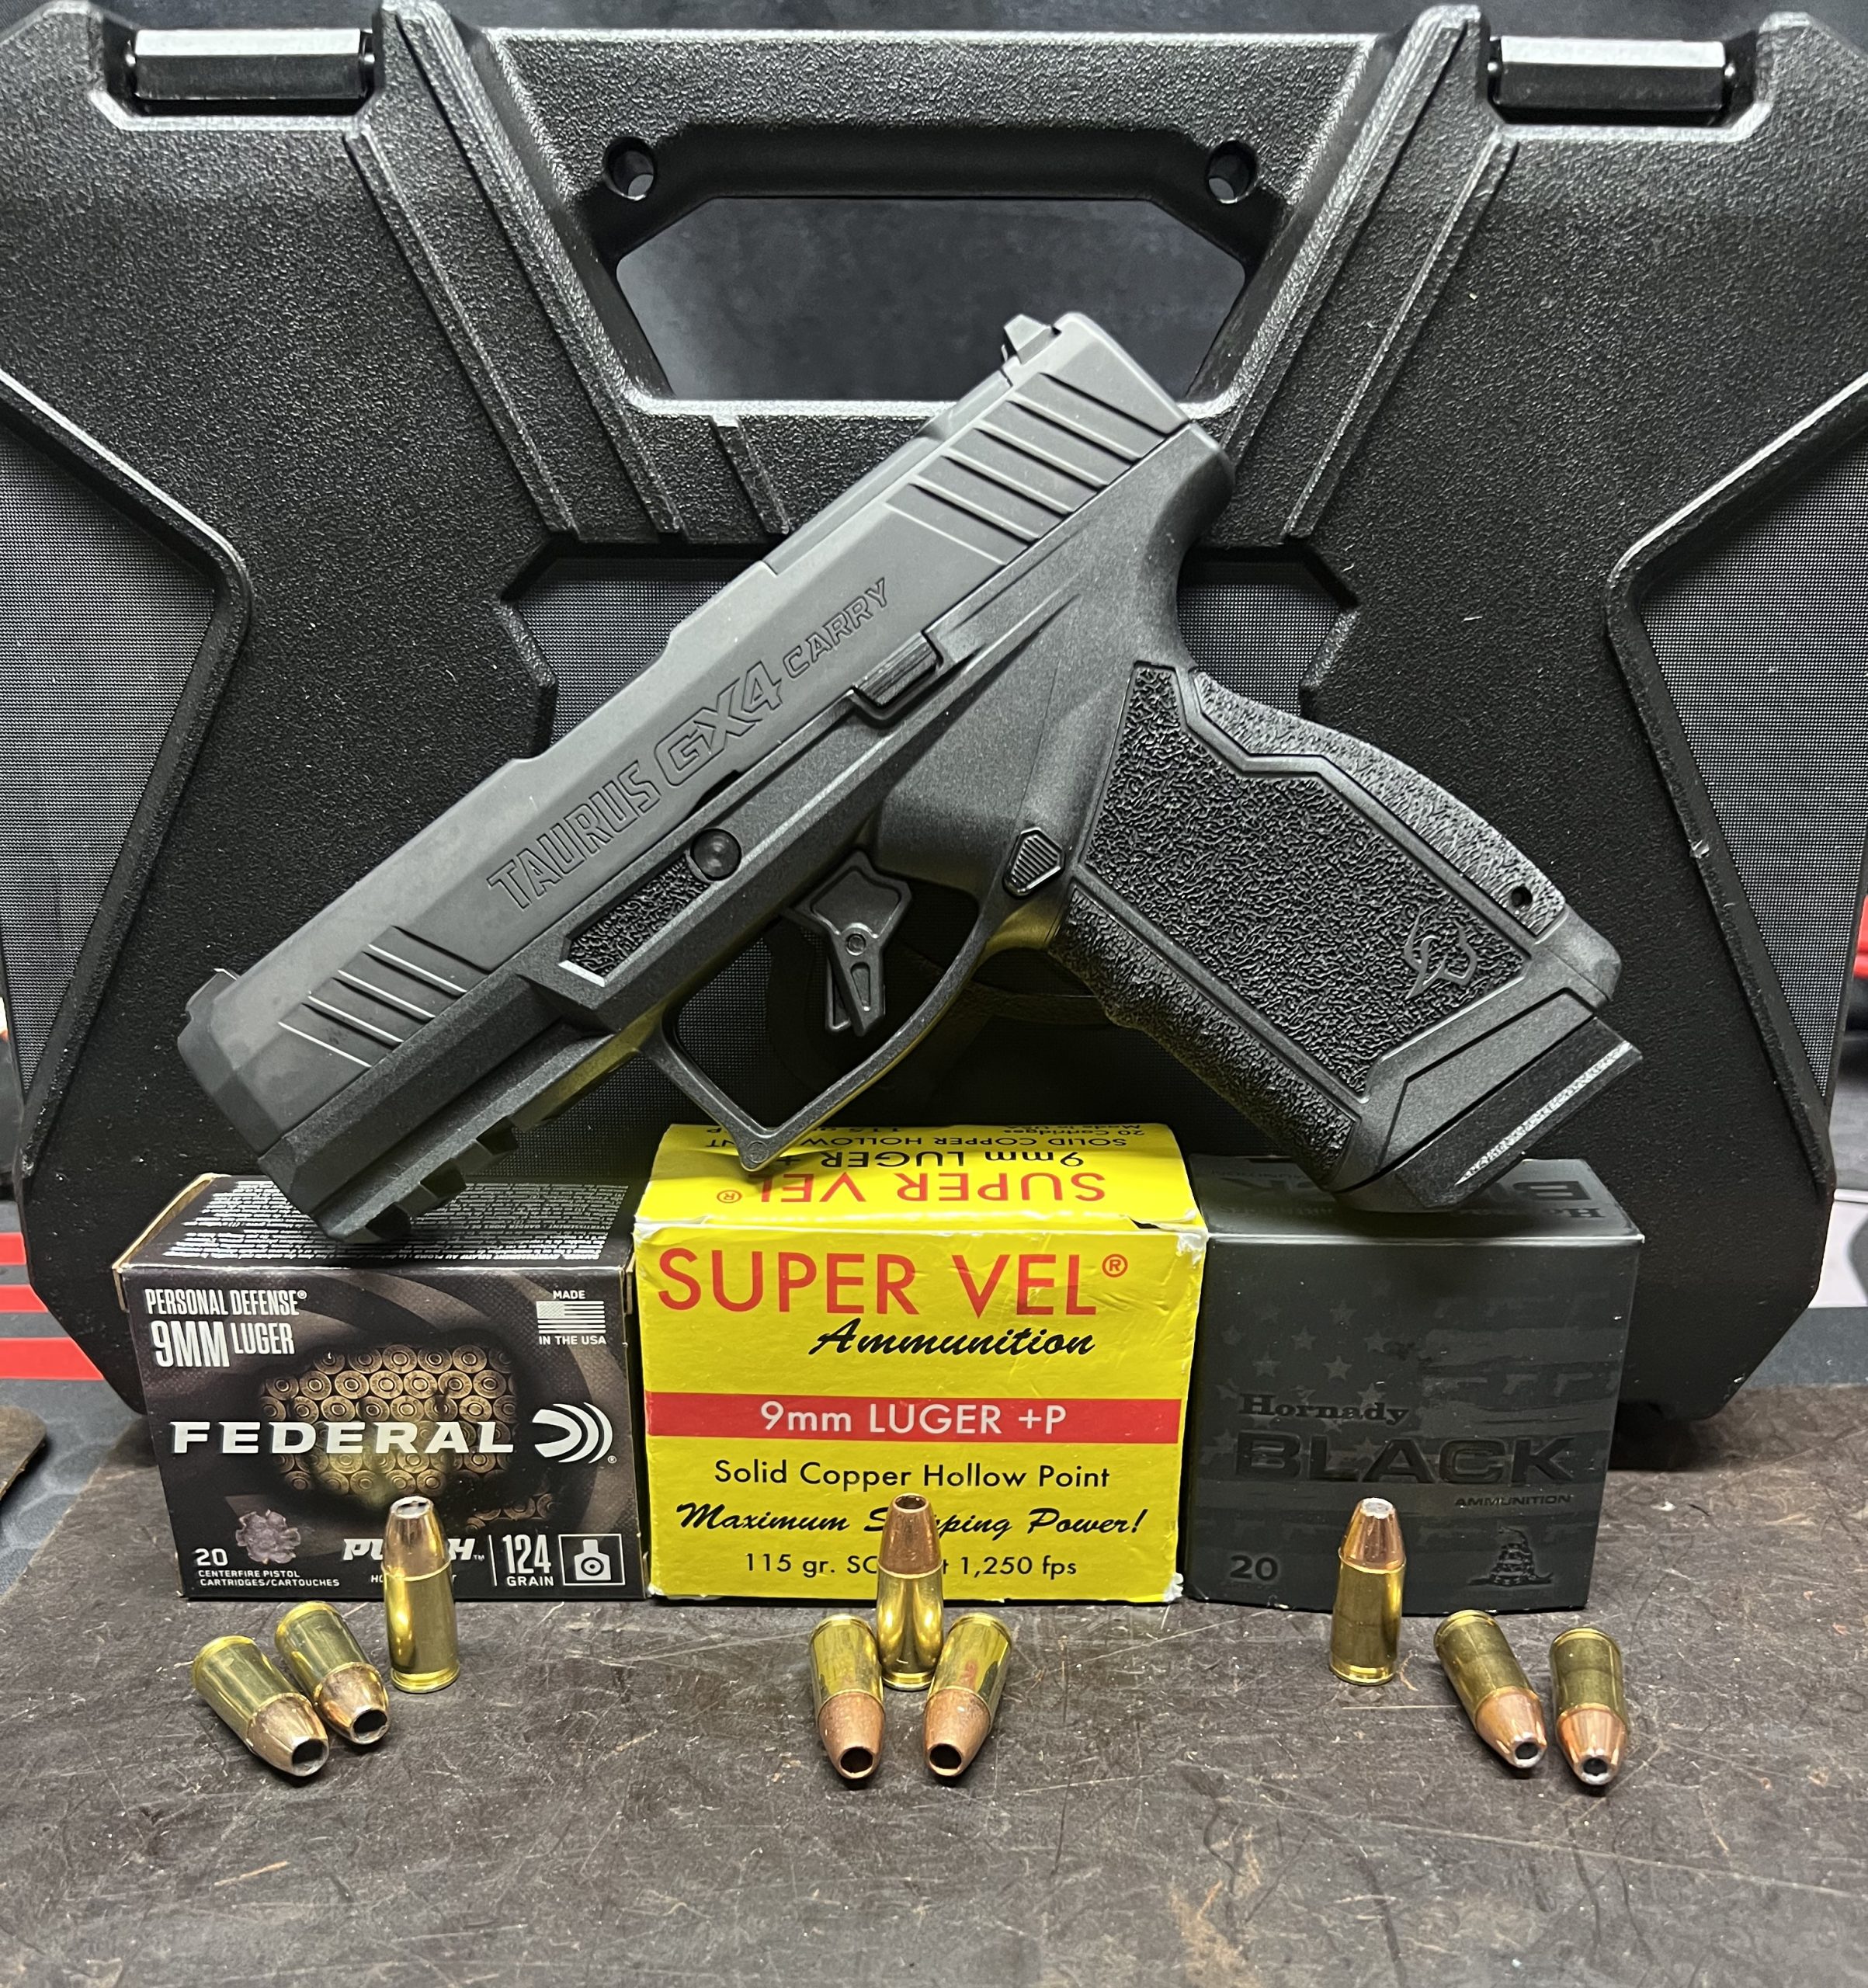 Taurus GX4 Carry with defensive ammunition